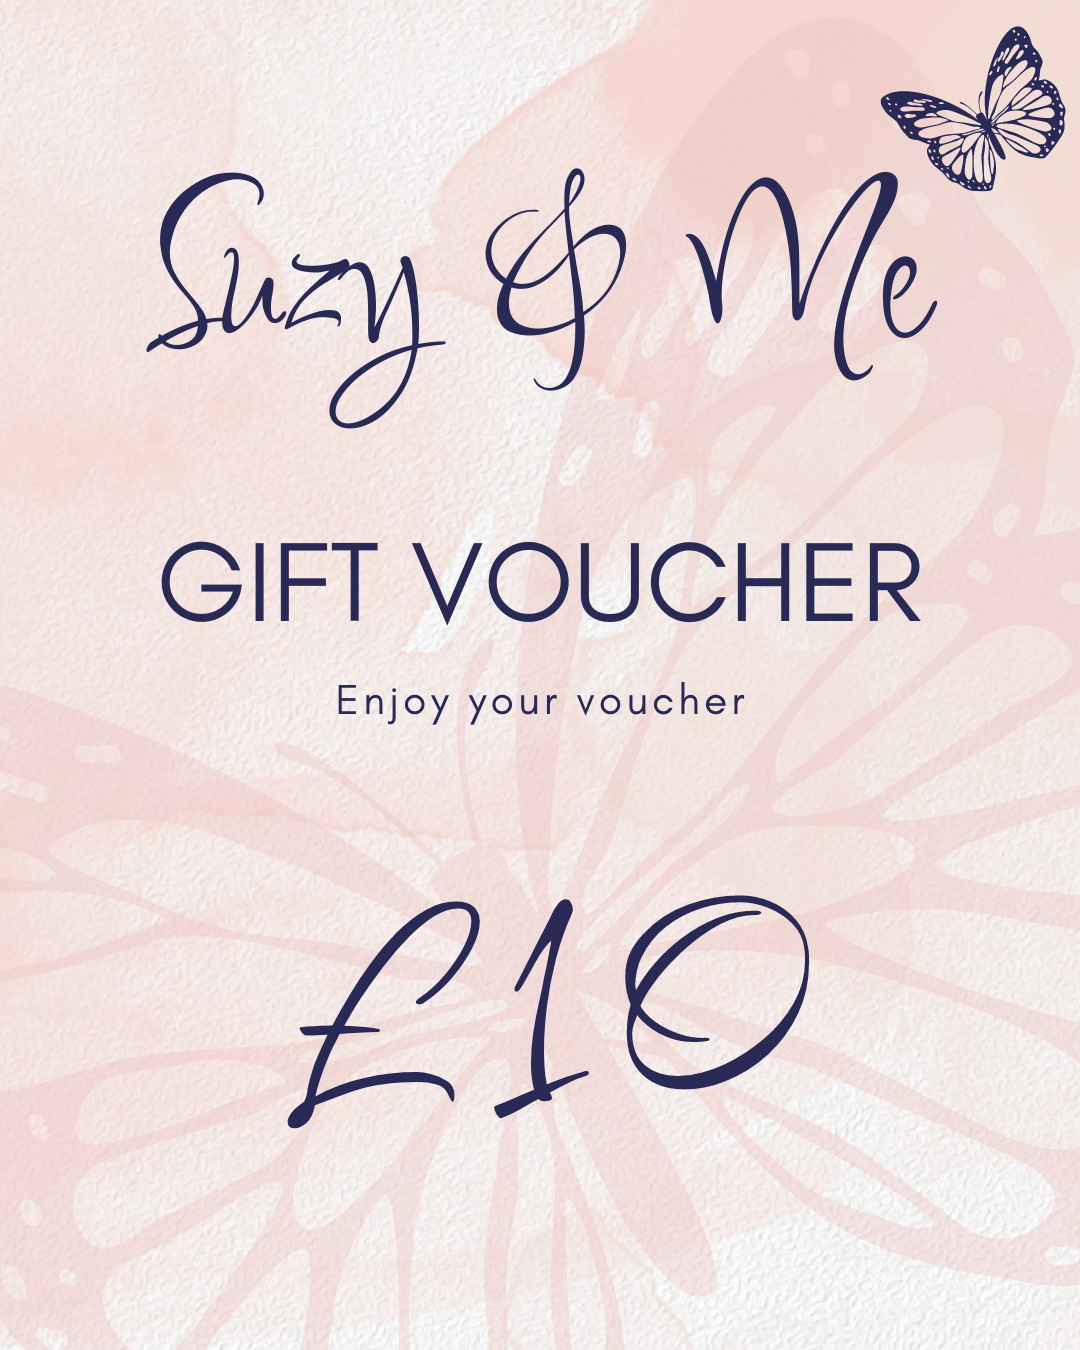 Suzy & Me Collection Gift Voucher £50